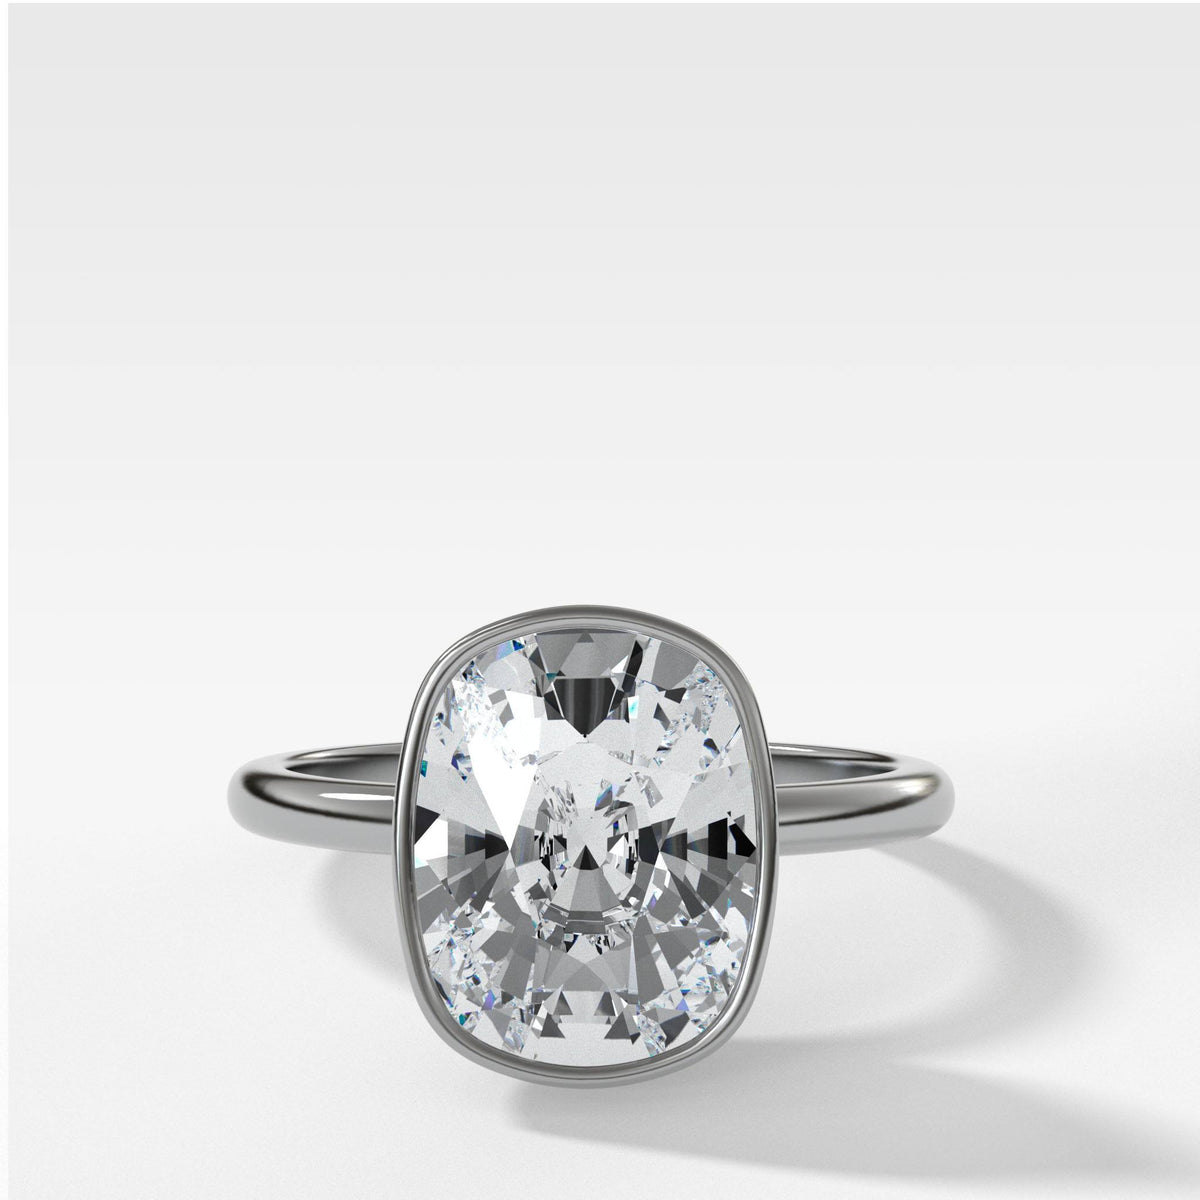 Bezel Penumbra Solitaire With Elongated Cushion Cut by Good Stone in White Gold